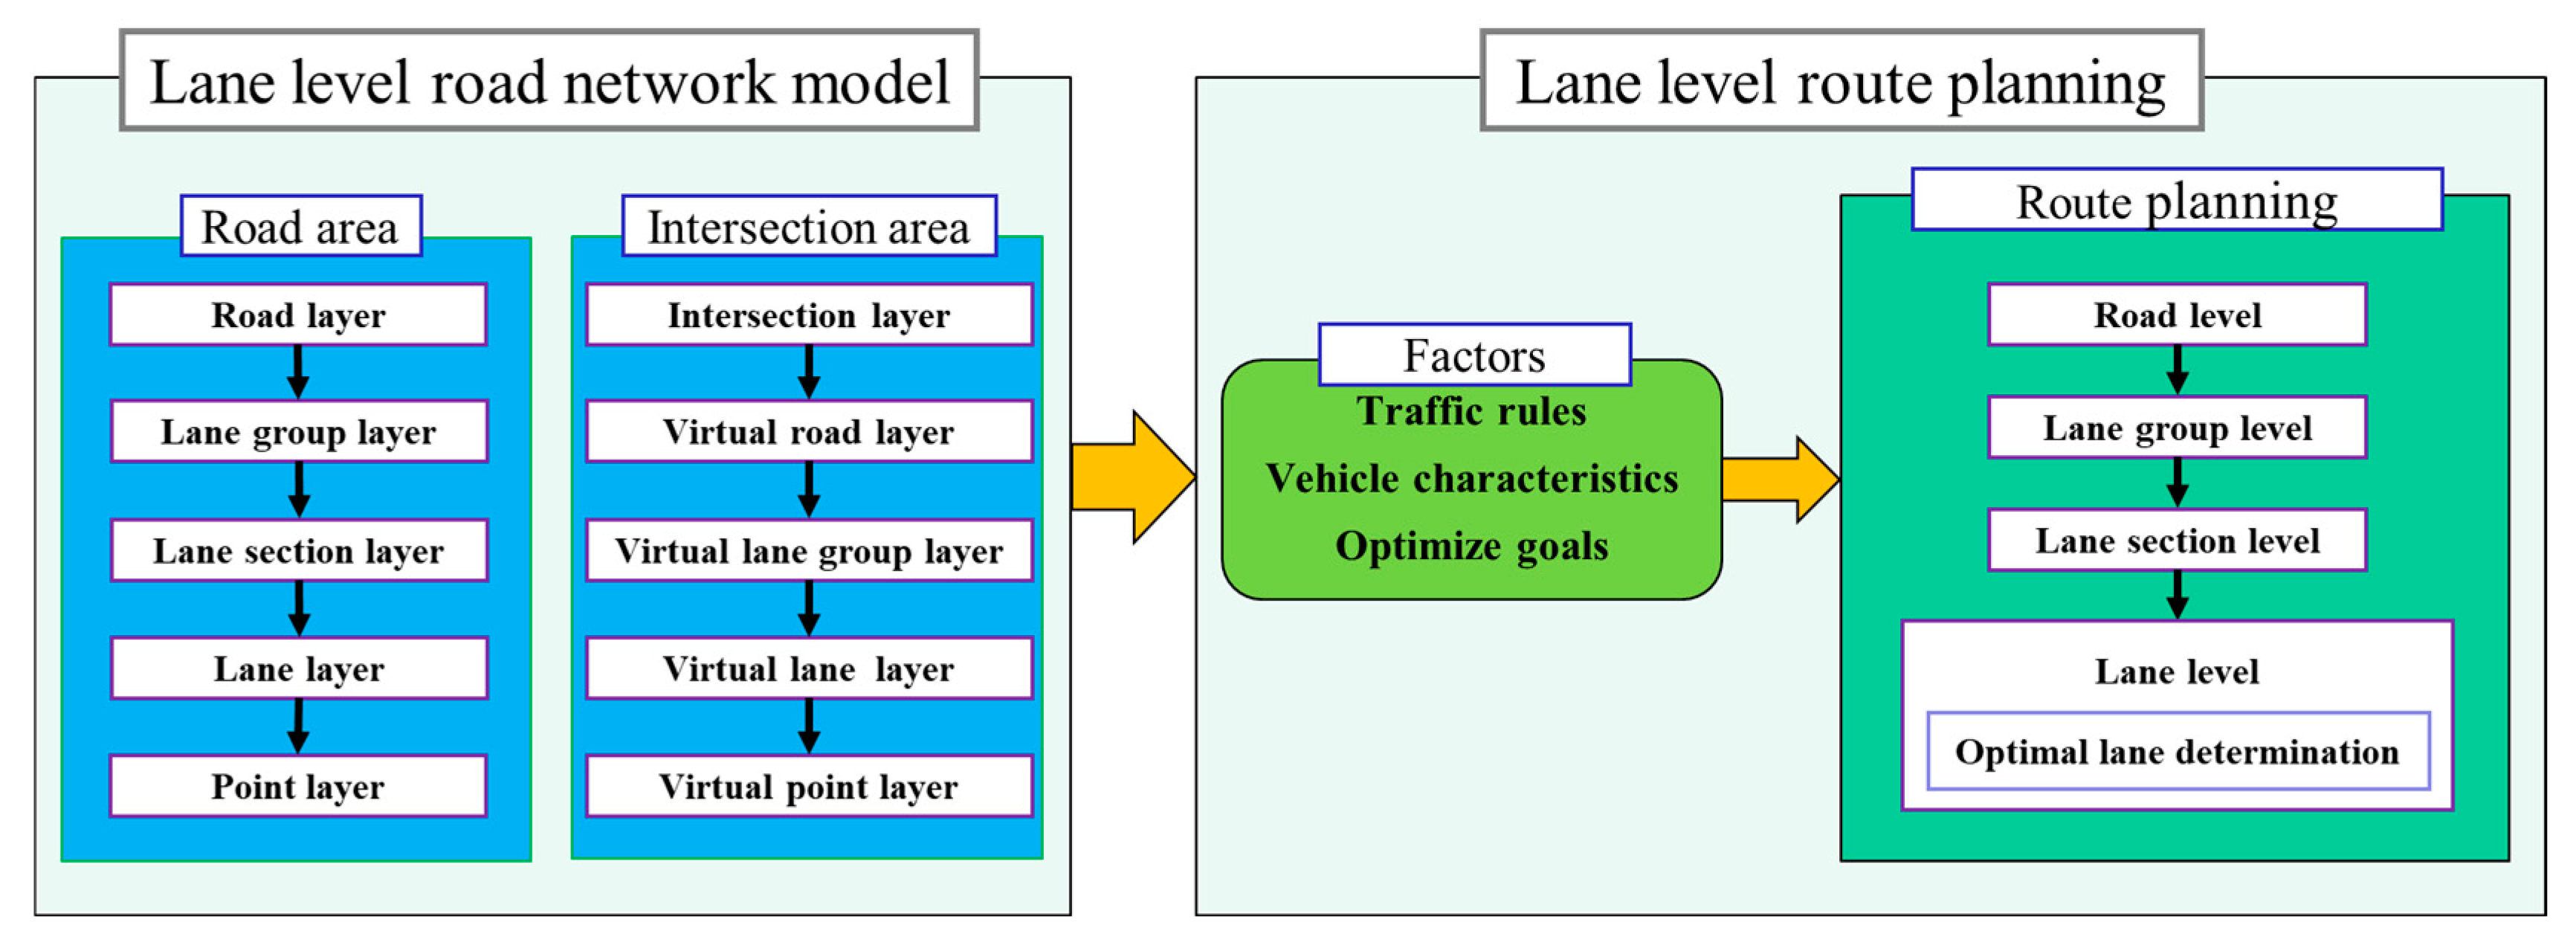 gasformig Stå på ski stabil WEVJ | Free Full-Text | Accelerated and Refined Lane-Level Route-Planning  Method Based on a New Road Network Model for Autonomous Vehicle Navigation